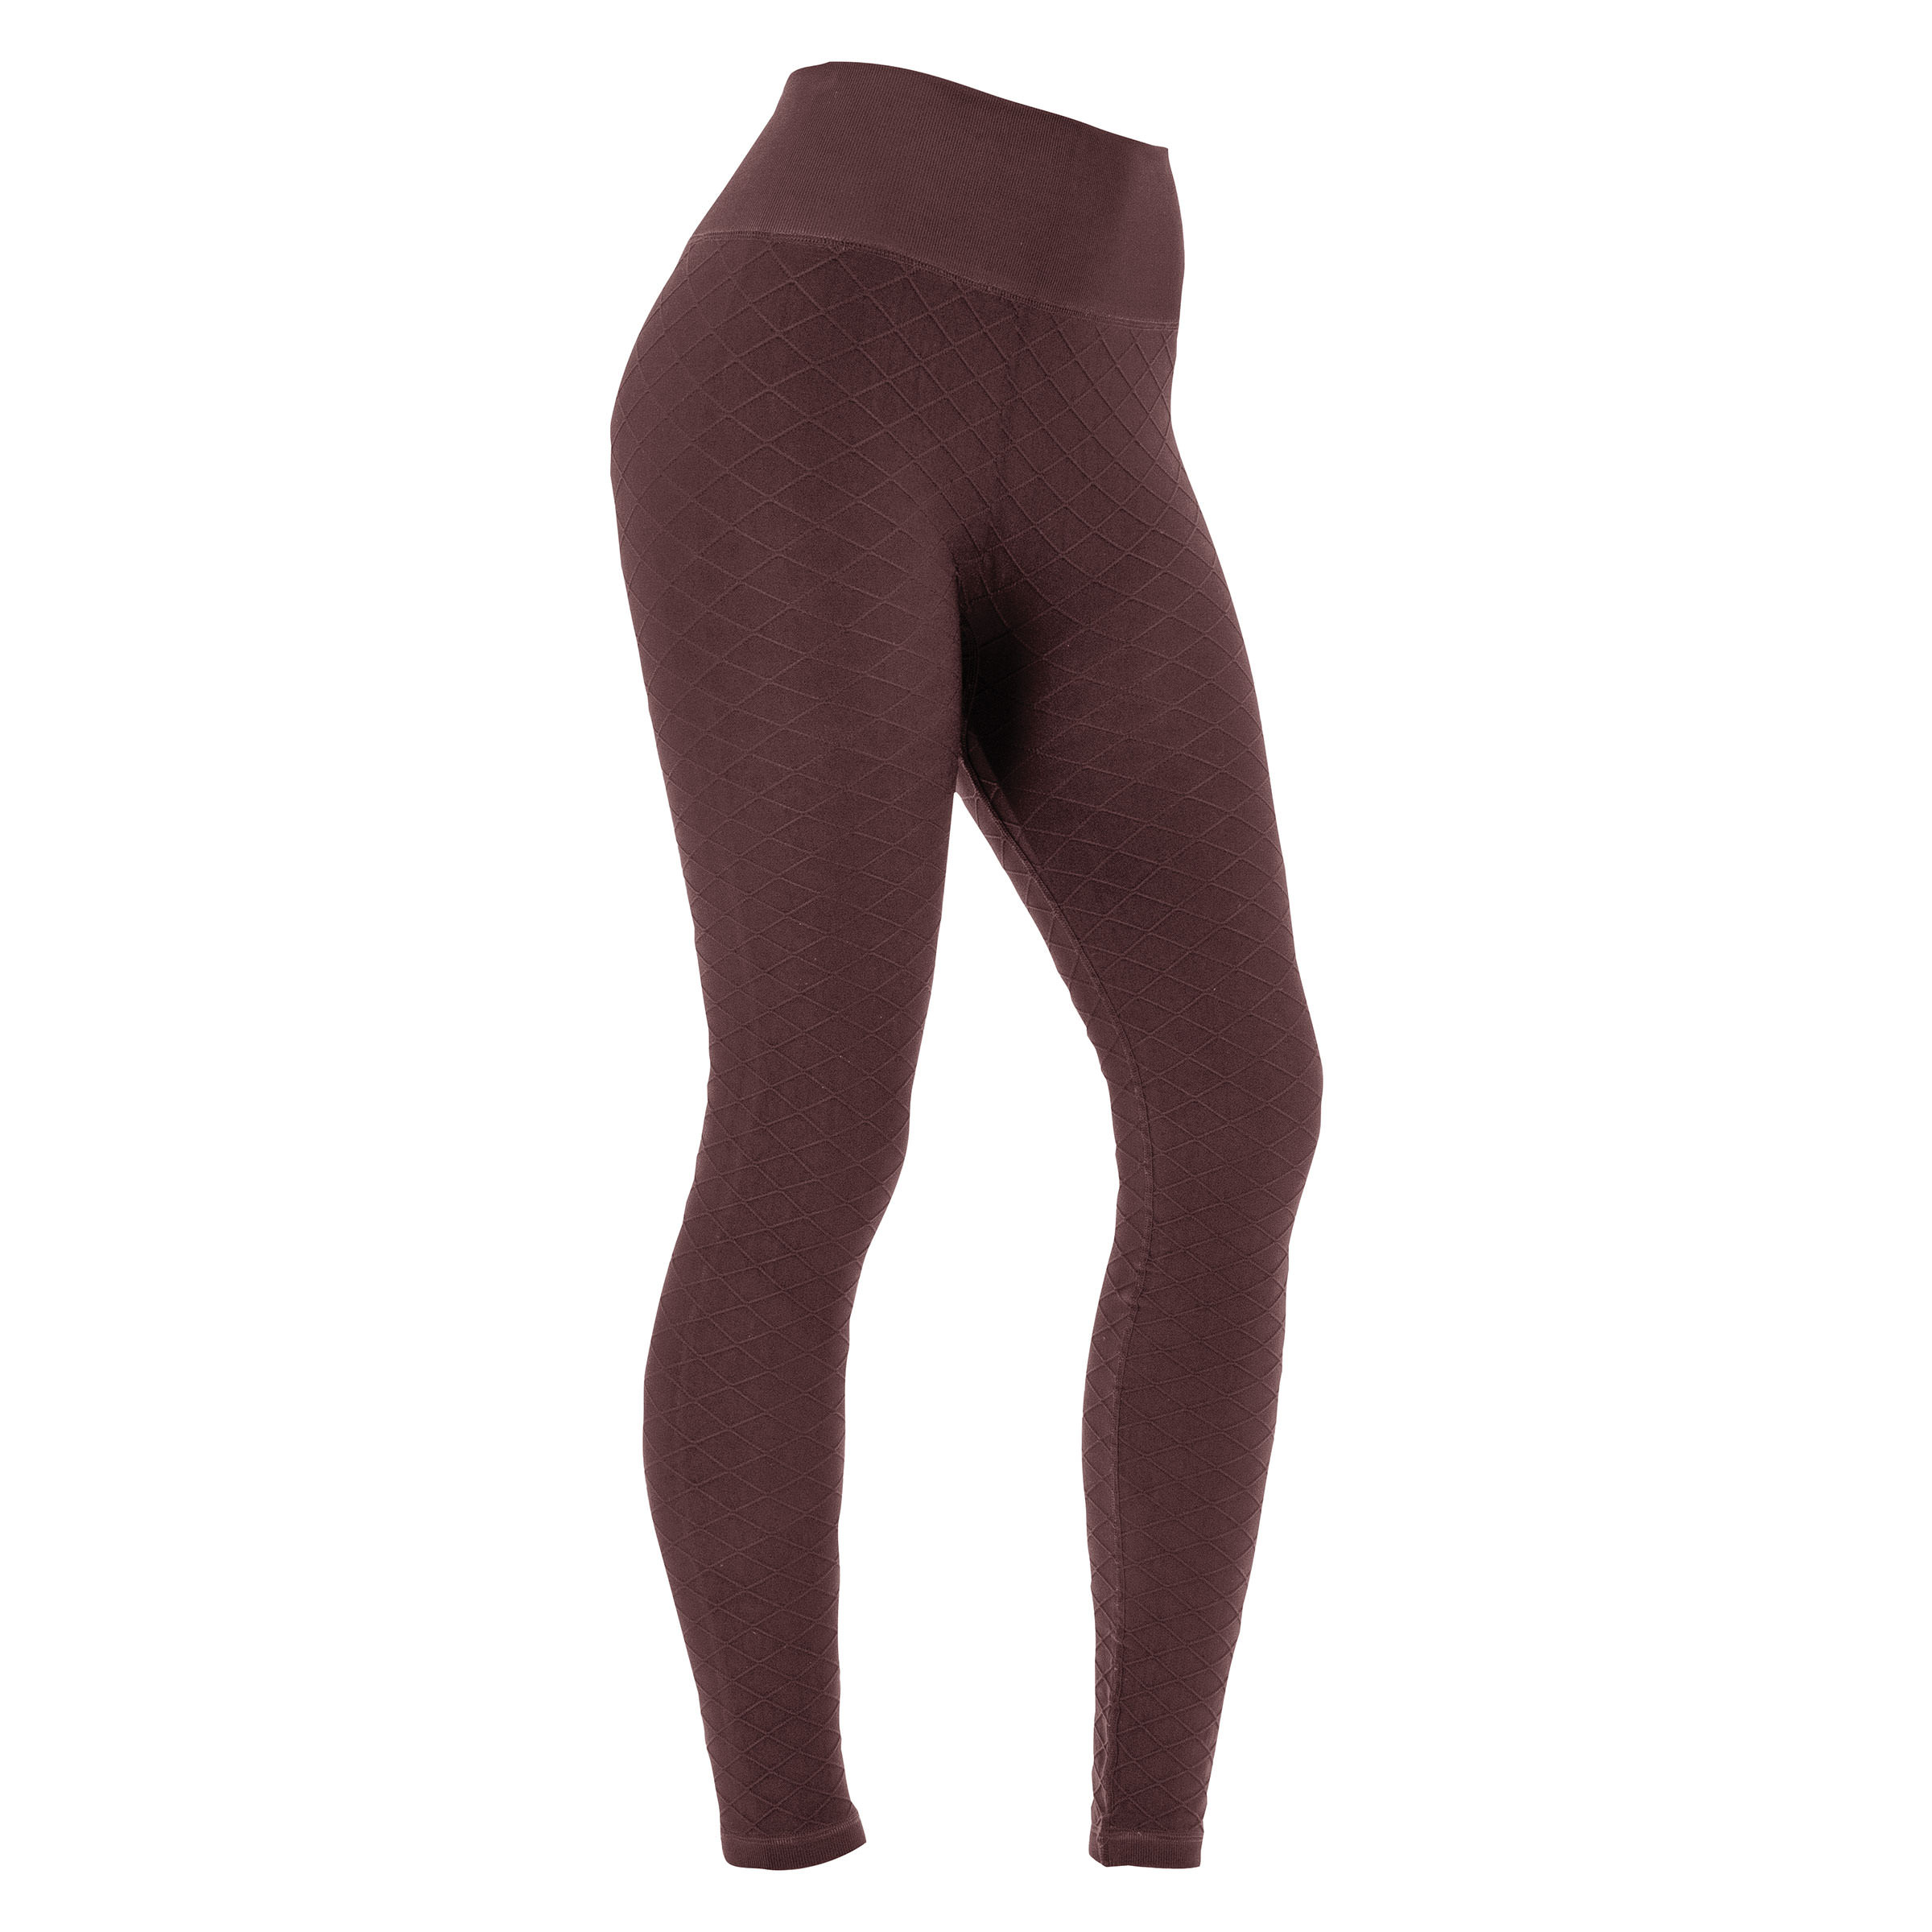 Women's Textured Footless Tights